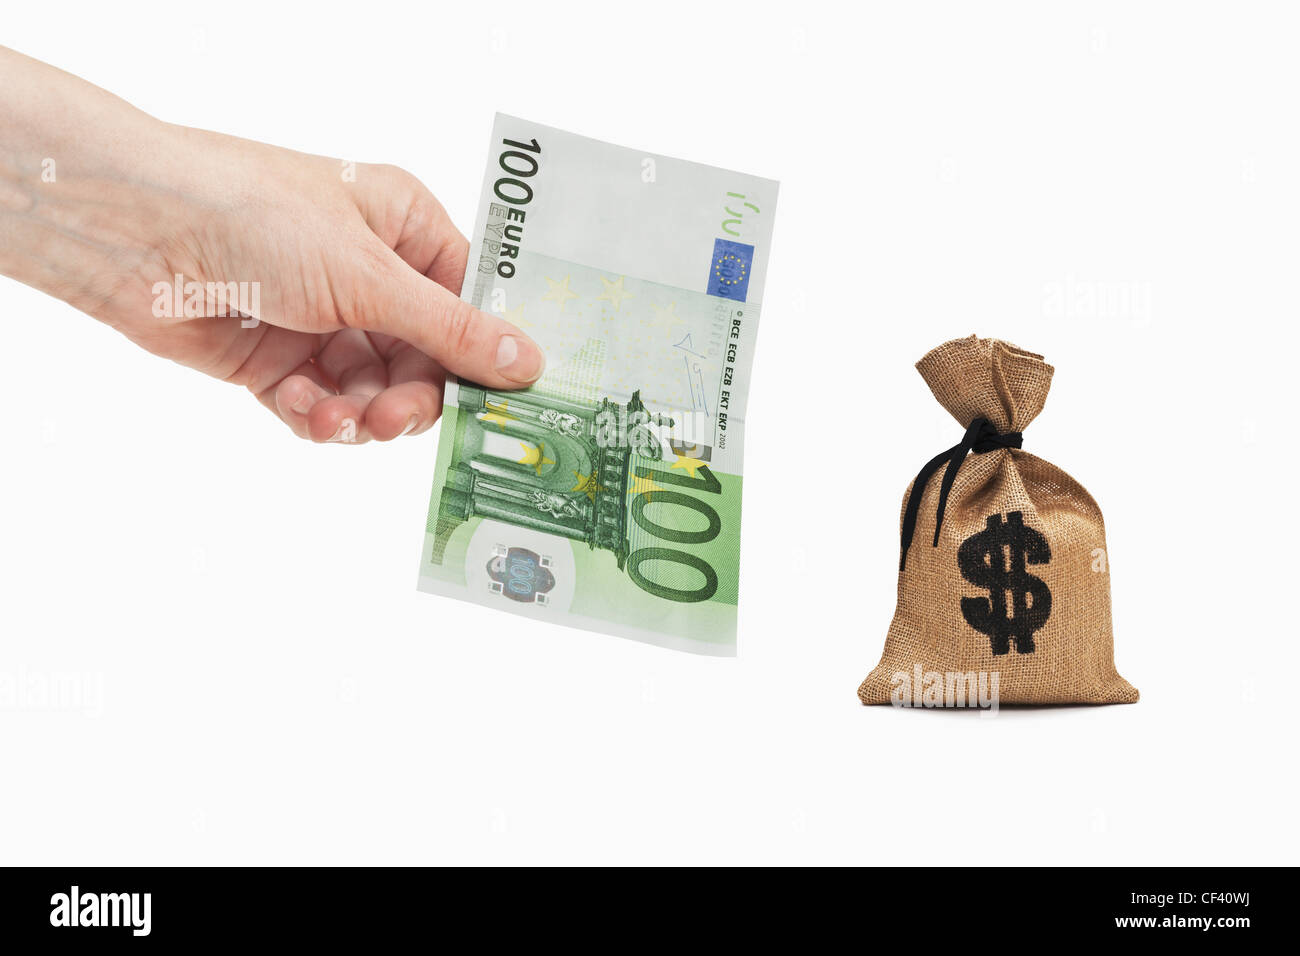 A 100 Euro bill is held in the hand. Near by is a money bag with a U.S. Dollar currency sign. Stock Photo